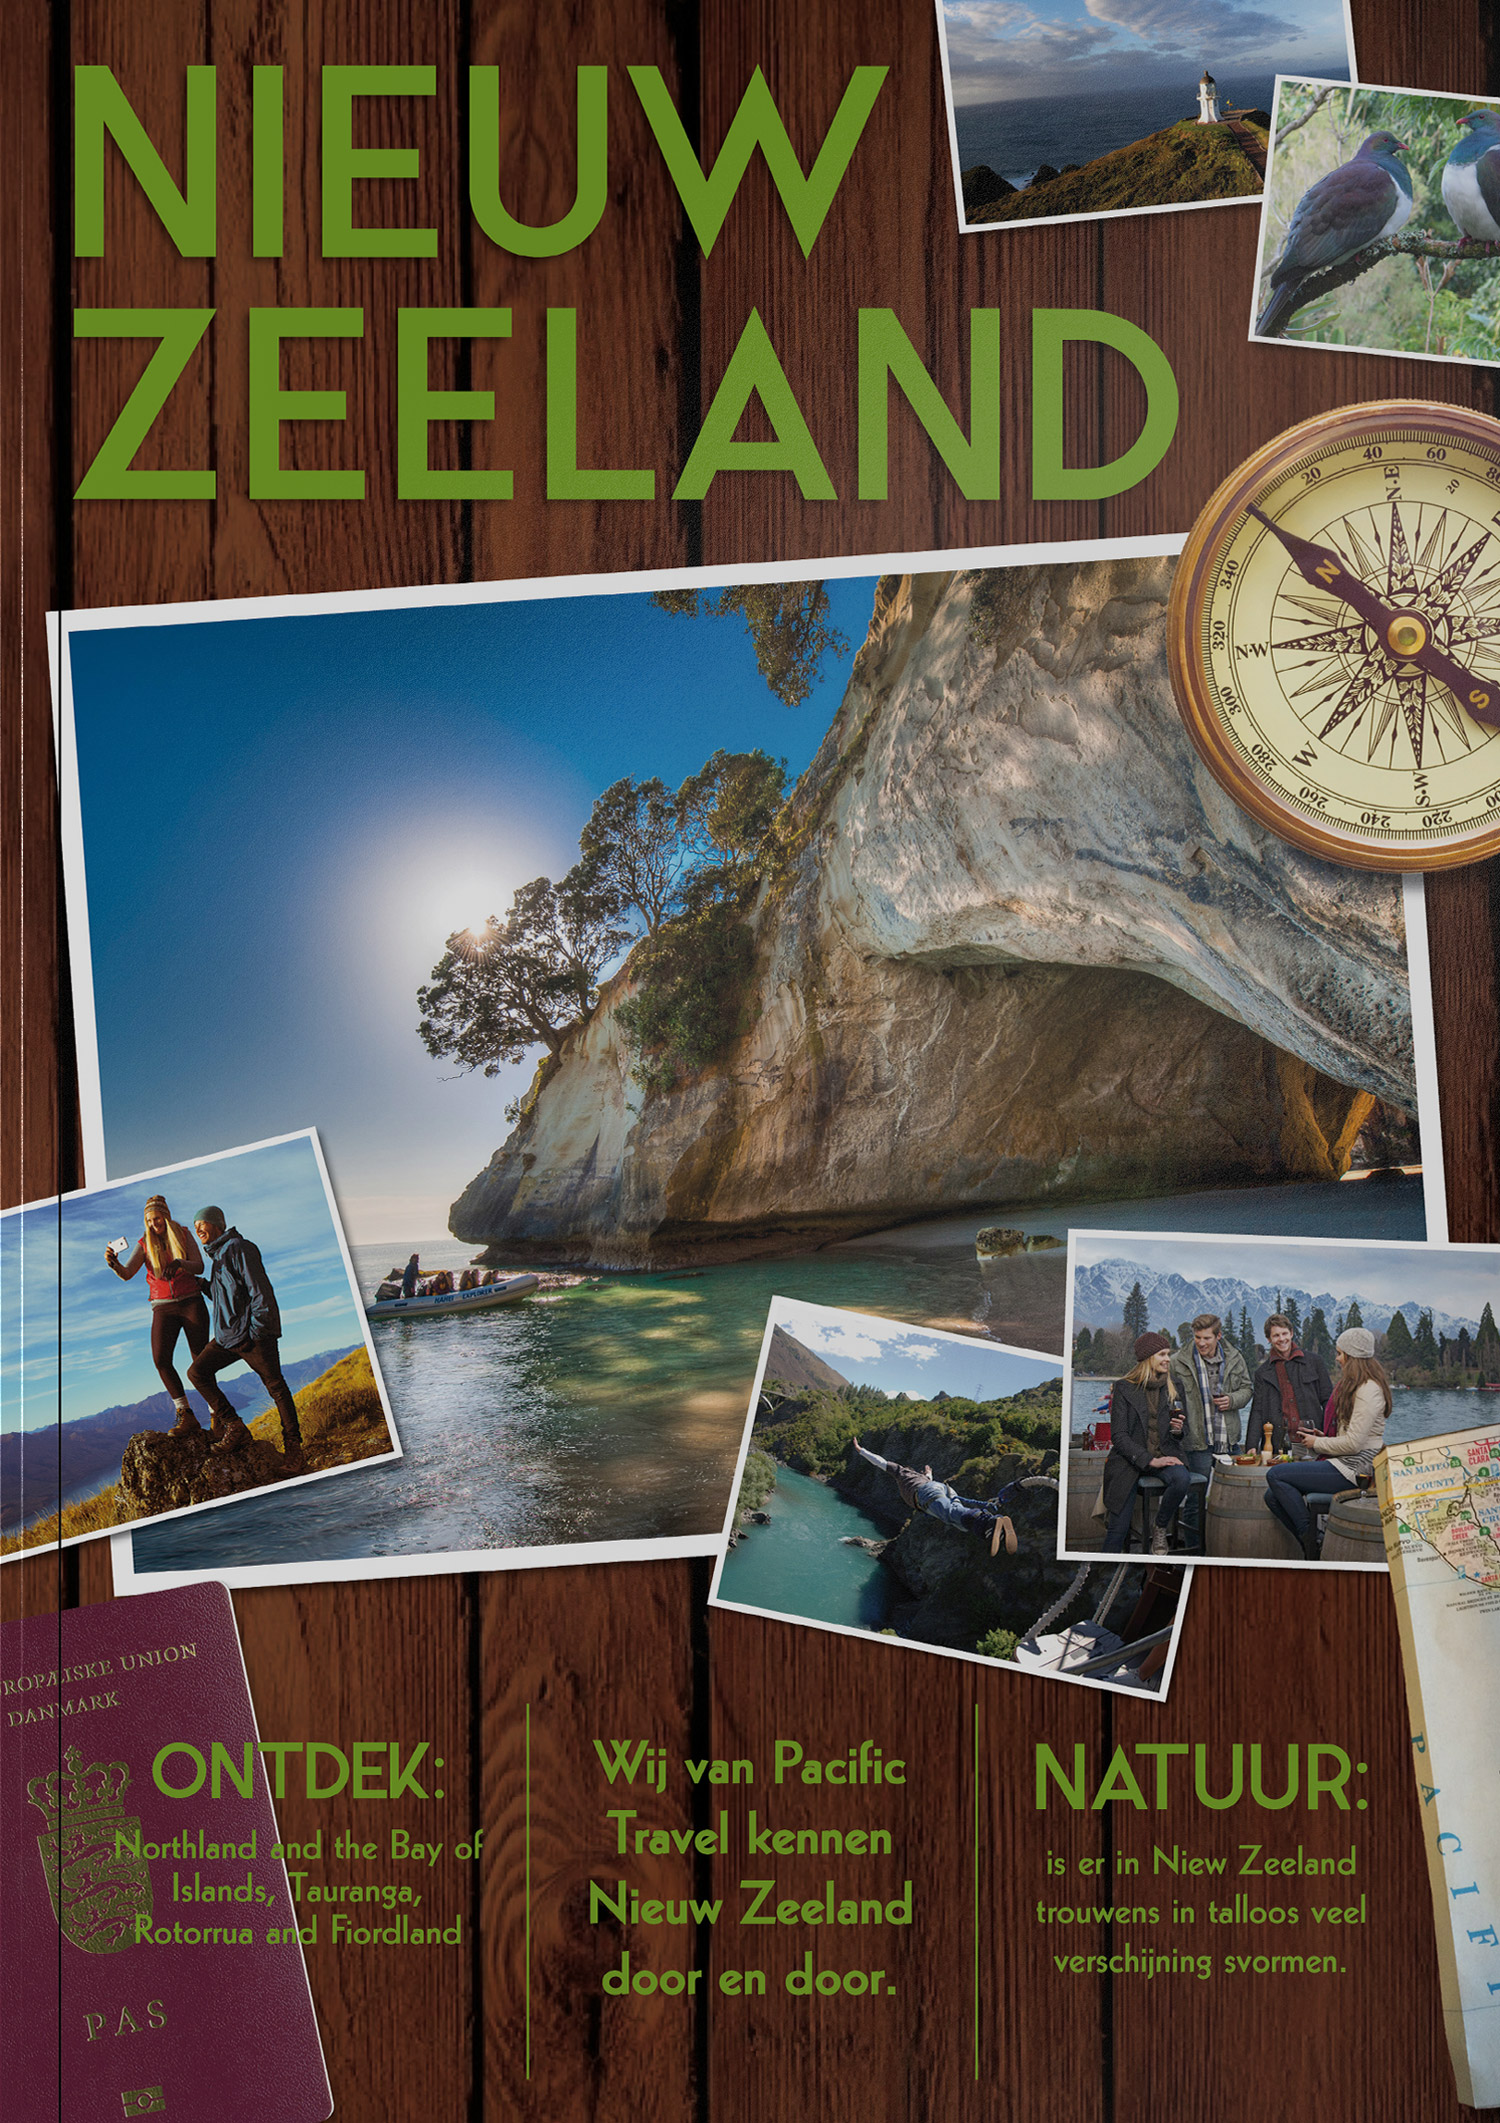 Pacific Travel's New Zealand brochure cover